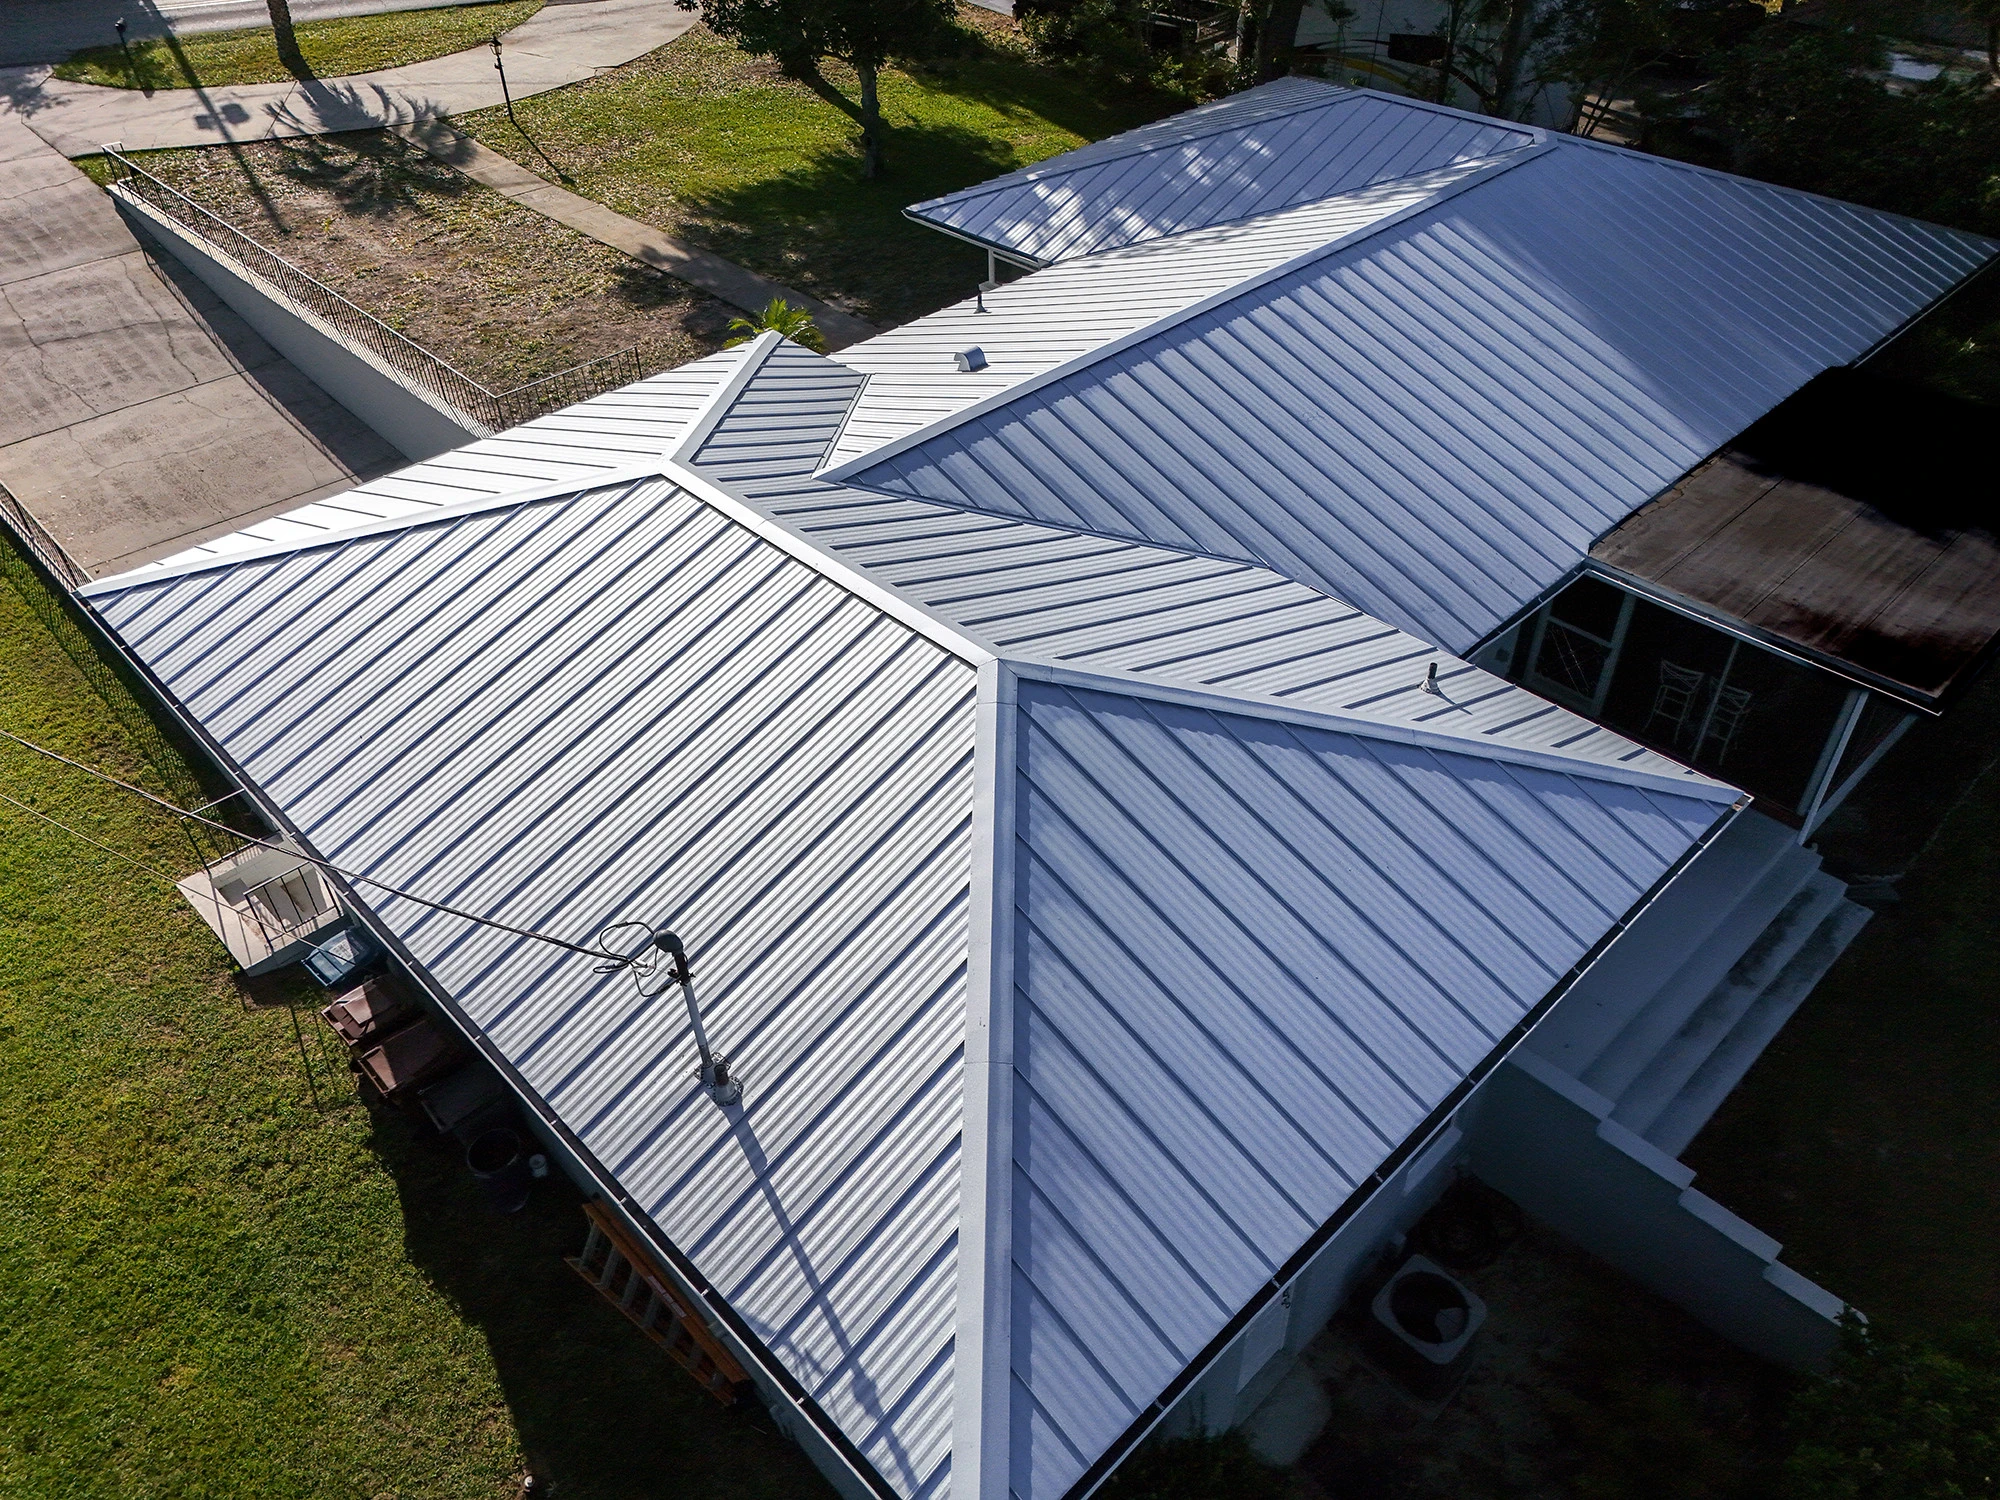 Header Image: RIG Roofing - A Florida Roofing Contractor